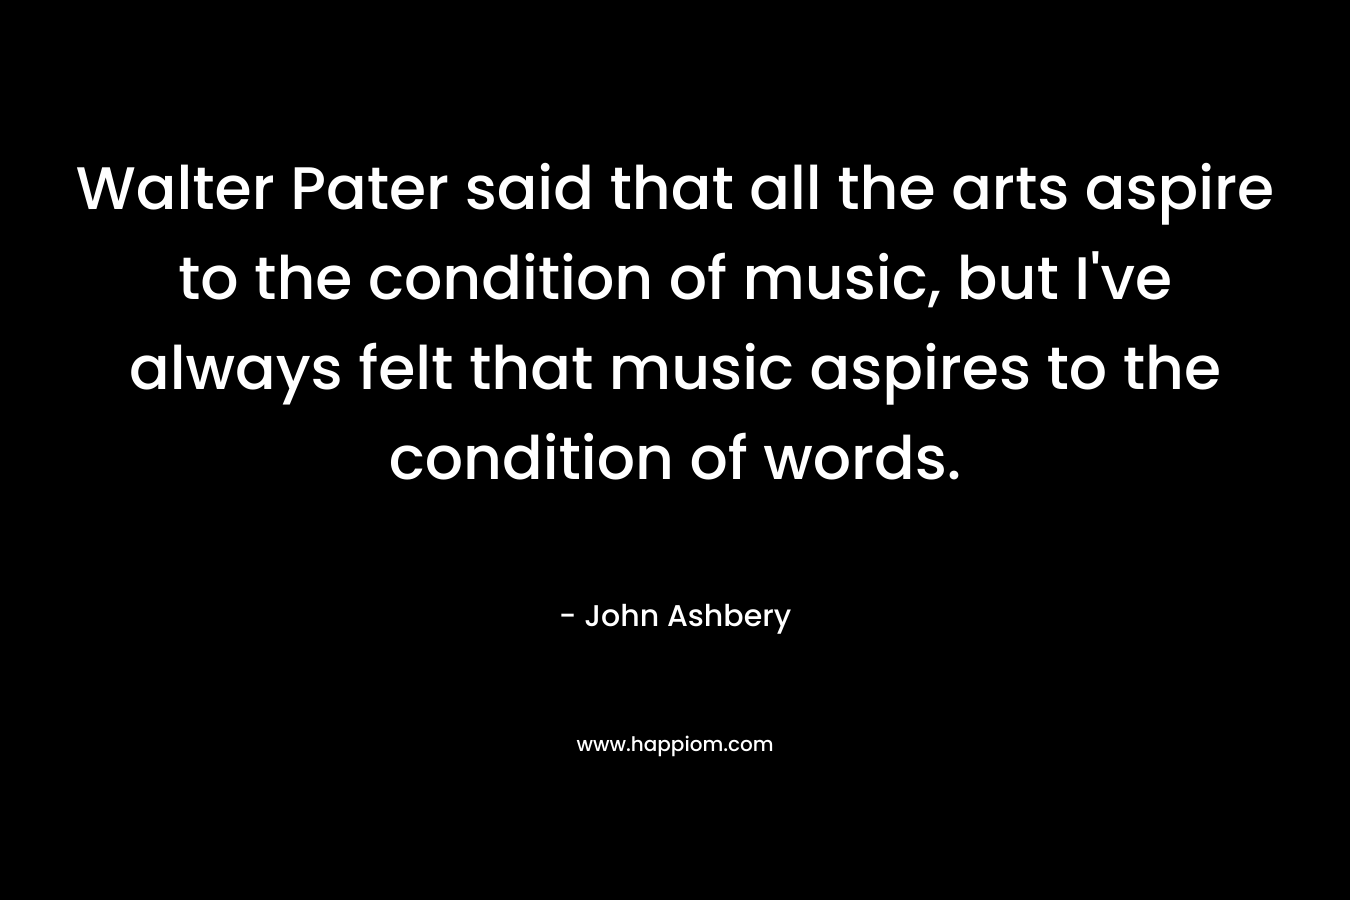 Walter Pater said that all the arts aspire to the condition of music, but I’ve always felt that music aspires to the condition of words. – John Ashbery